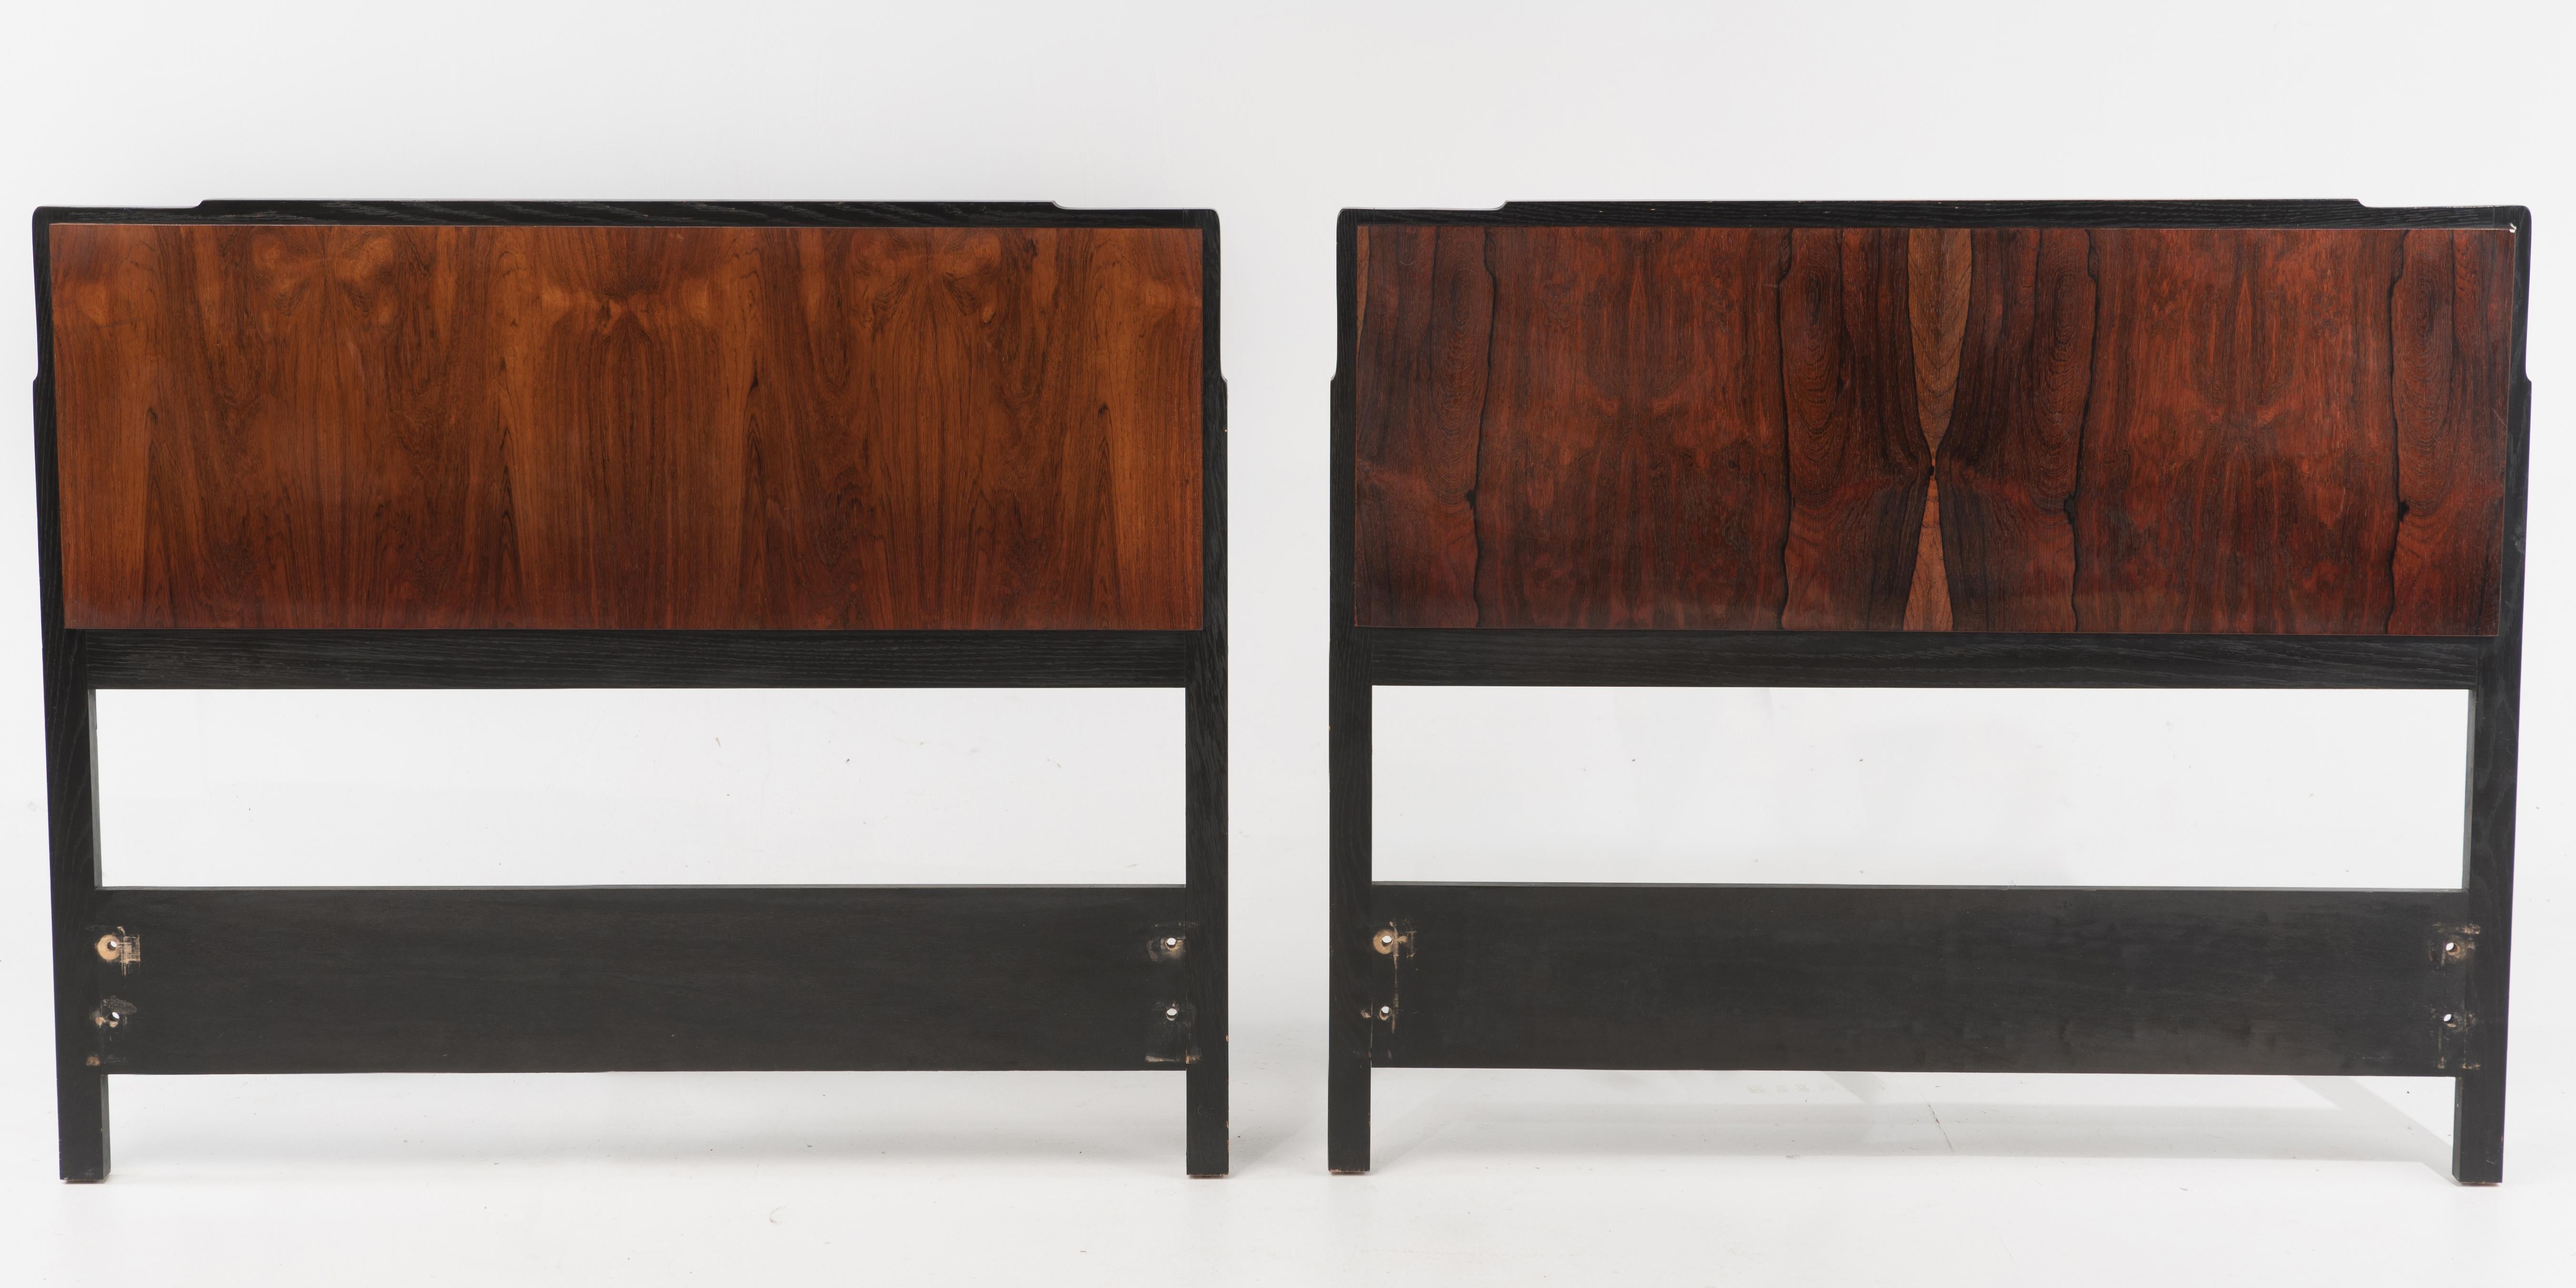 A wonderful pair of midcentury cloud form rosewood and ebonized oak twin headboards. There is a stenciled number, but no mark. The rosewood panels are 13.8 H x W 39. Well made, very similar to a known Harvey Probber form.